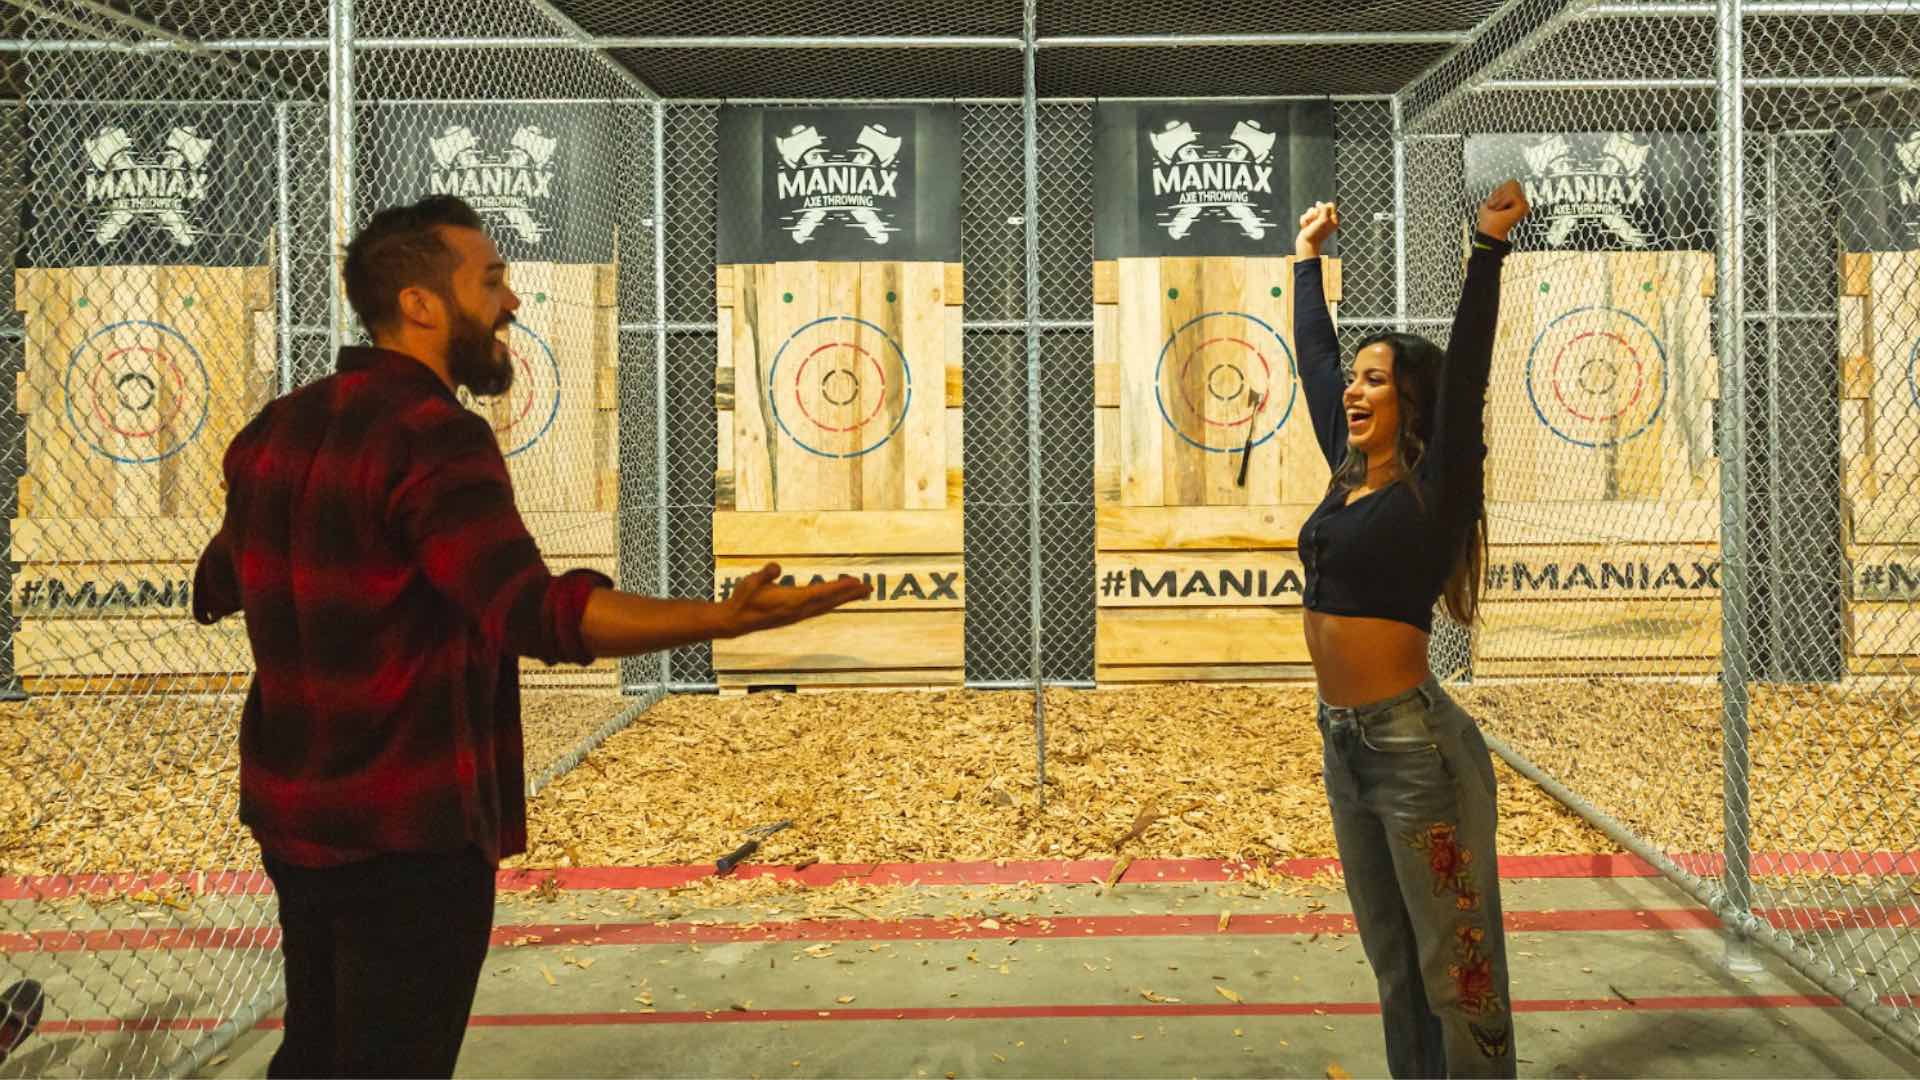 You Can Win a Free Valentine's Day Date Night Complete with Complimentary Pizza, Drinks and Axe Throwing